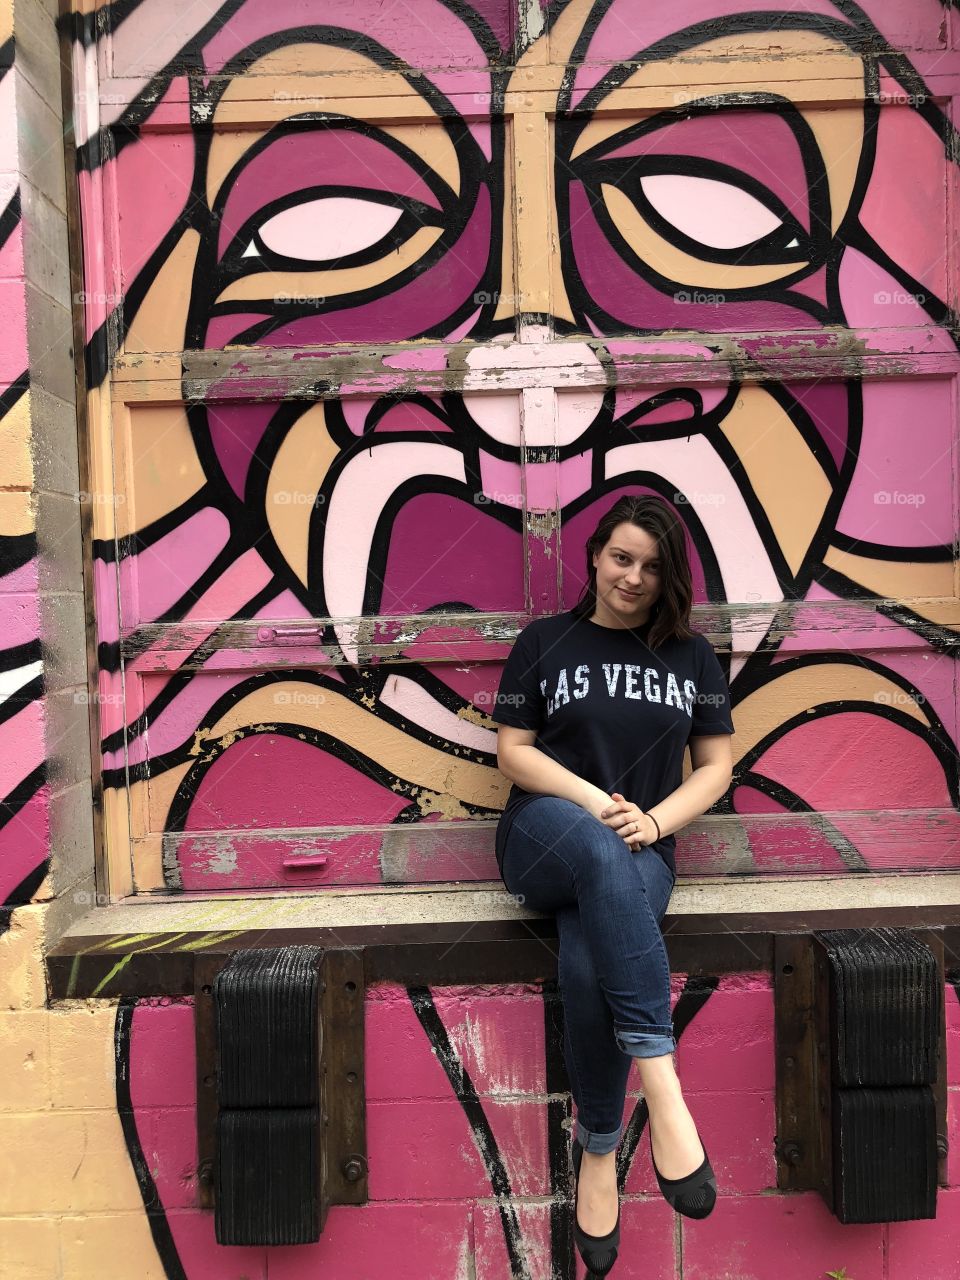 Young Las Vegas woman sitting in front of graffiti.